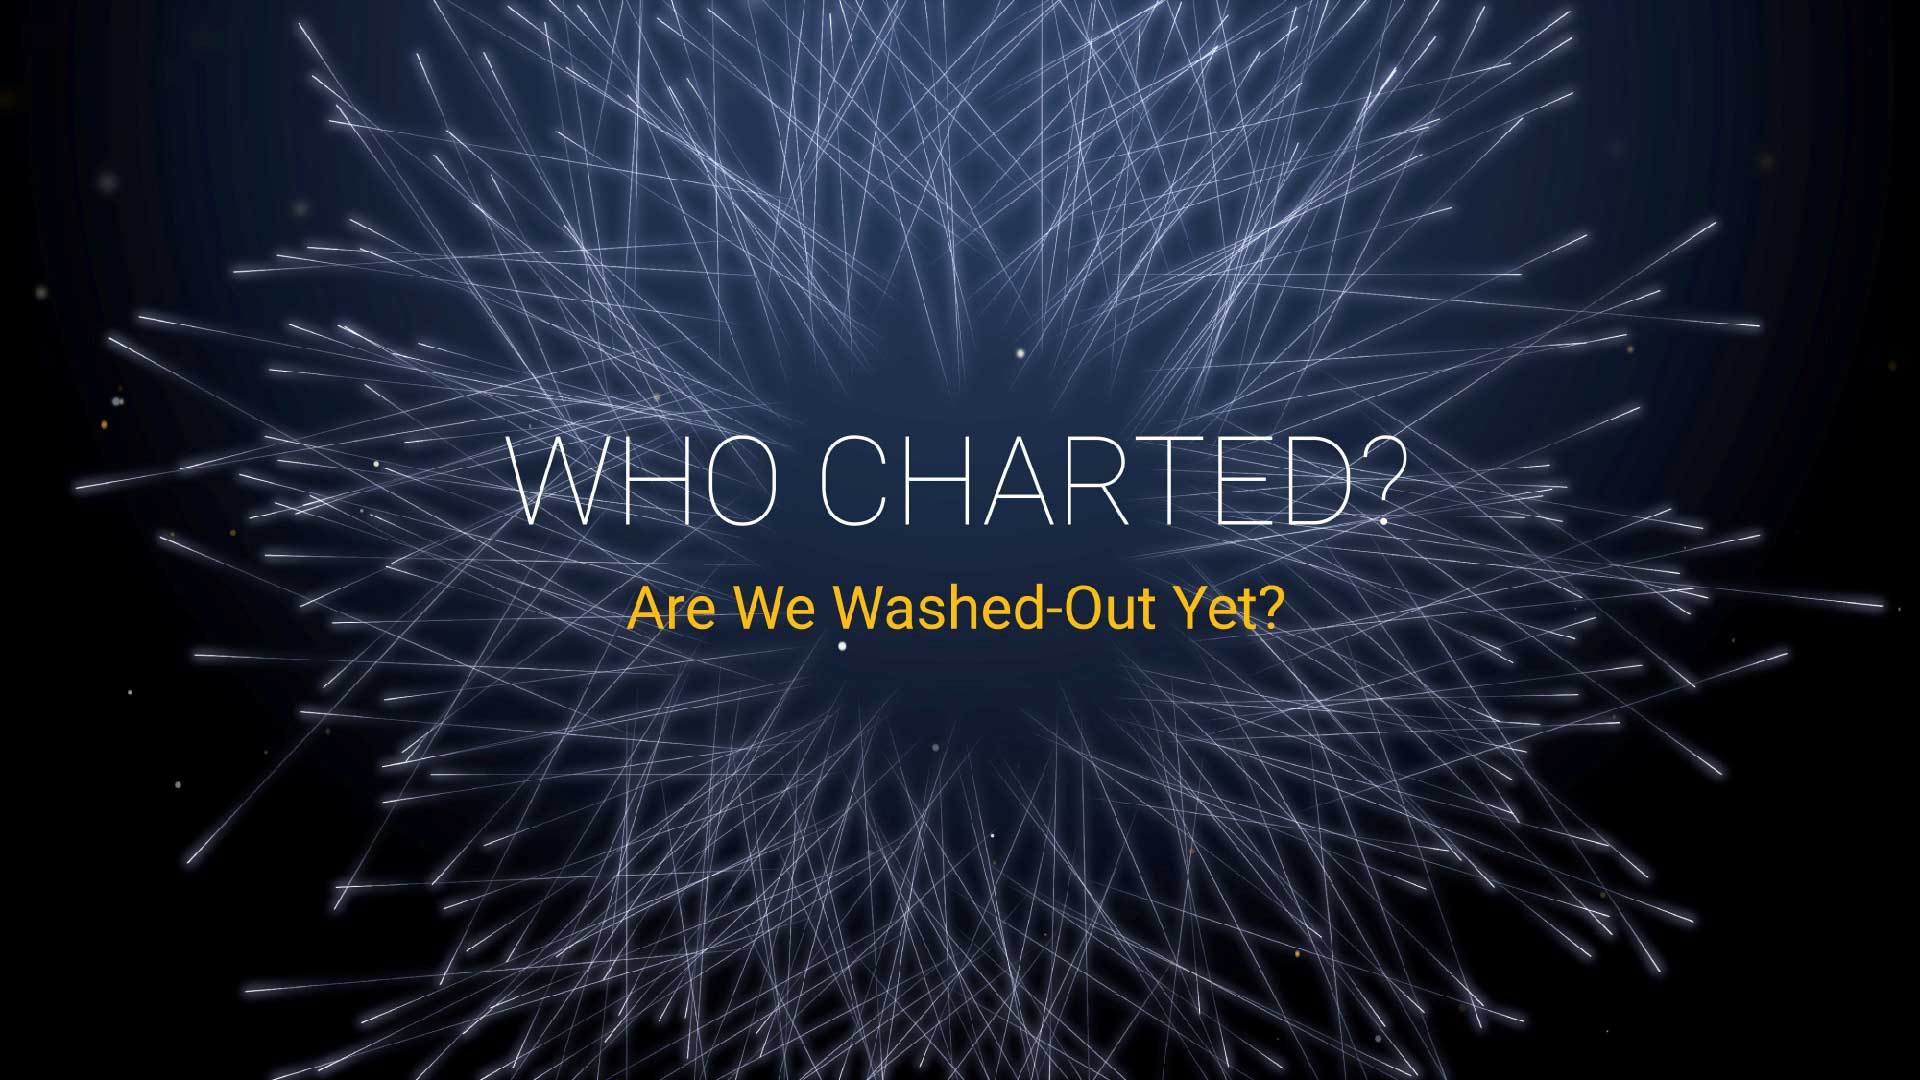 Who Charted? (E18) Are We Washed-Out Yet?